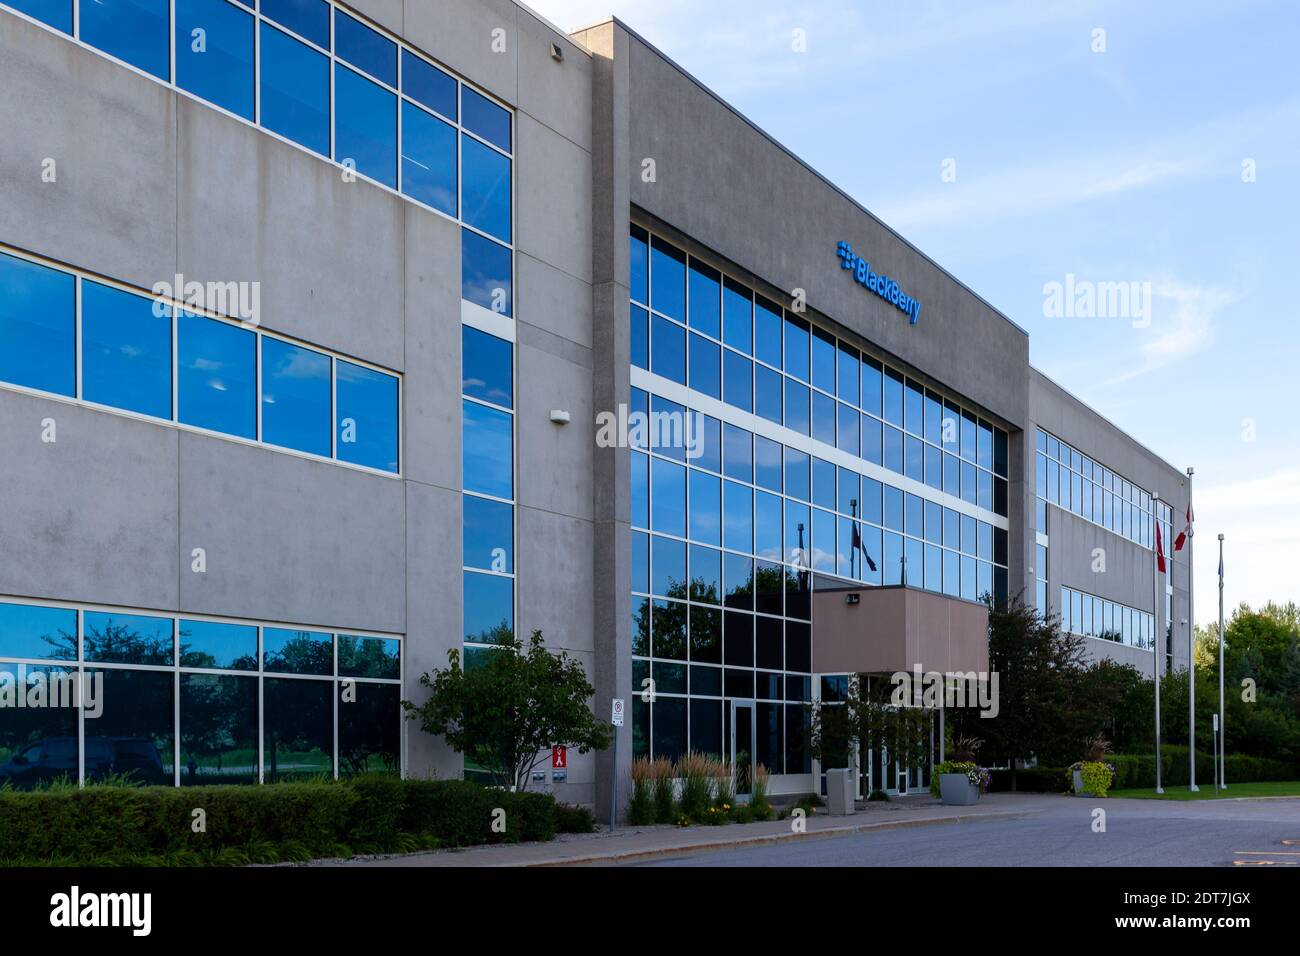 BlackBerry office sign and buildings in Kanata, Ontario, Canada Stock Photo